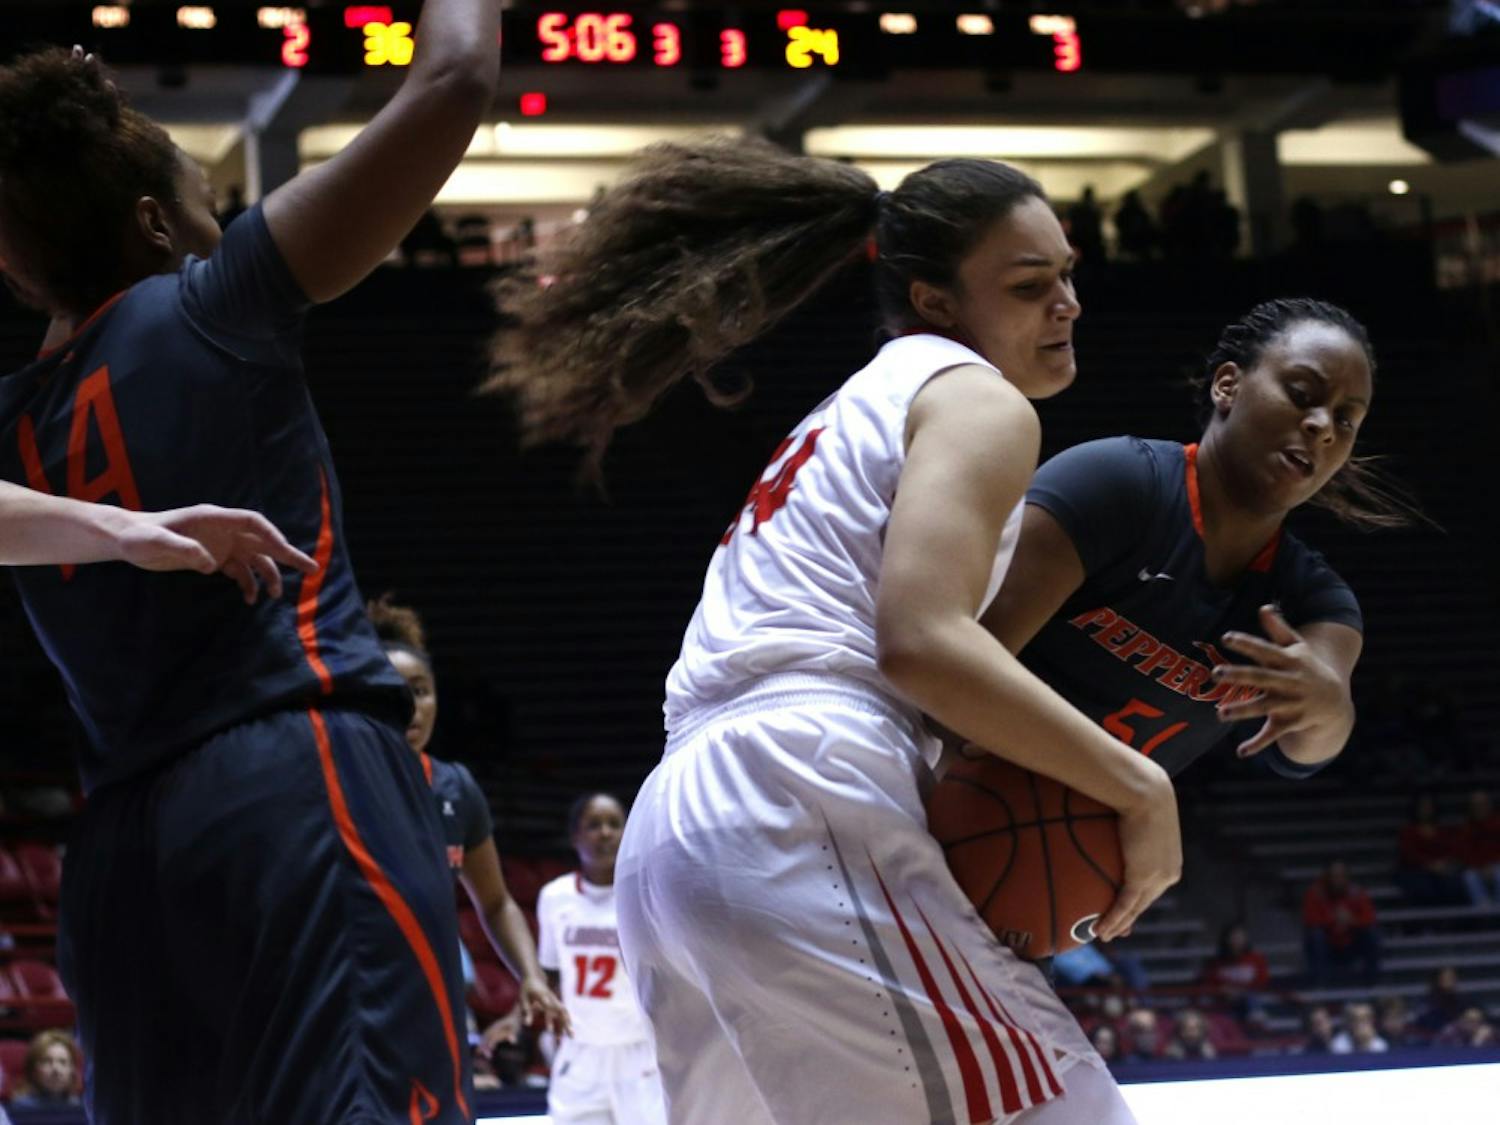 Freshman center Jaisa Nunn fights for the ball against a Pepperdine player at WisePies Arena Dec. 12. The Lobos beat Minnesota 72-53 on Wednesday.&nbsp;